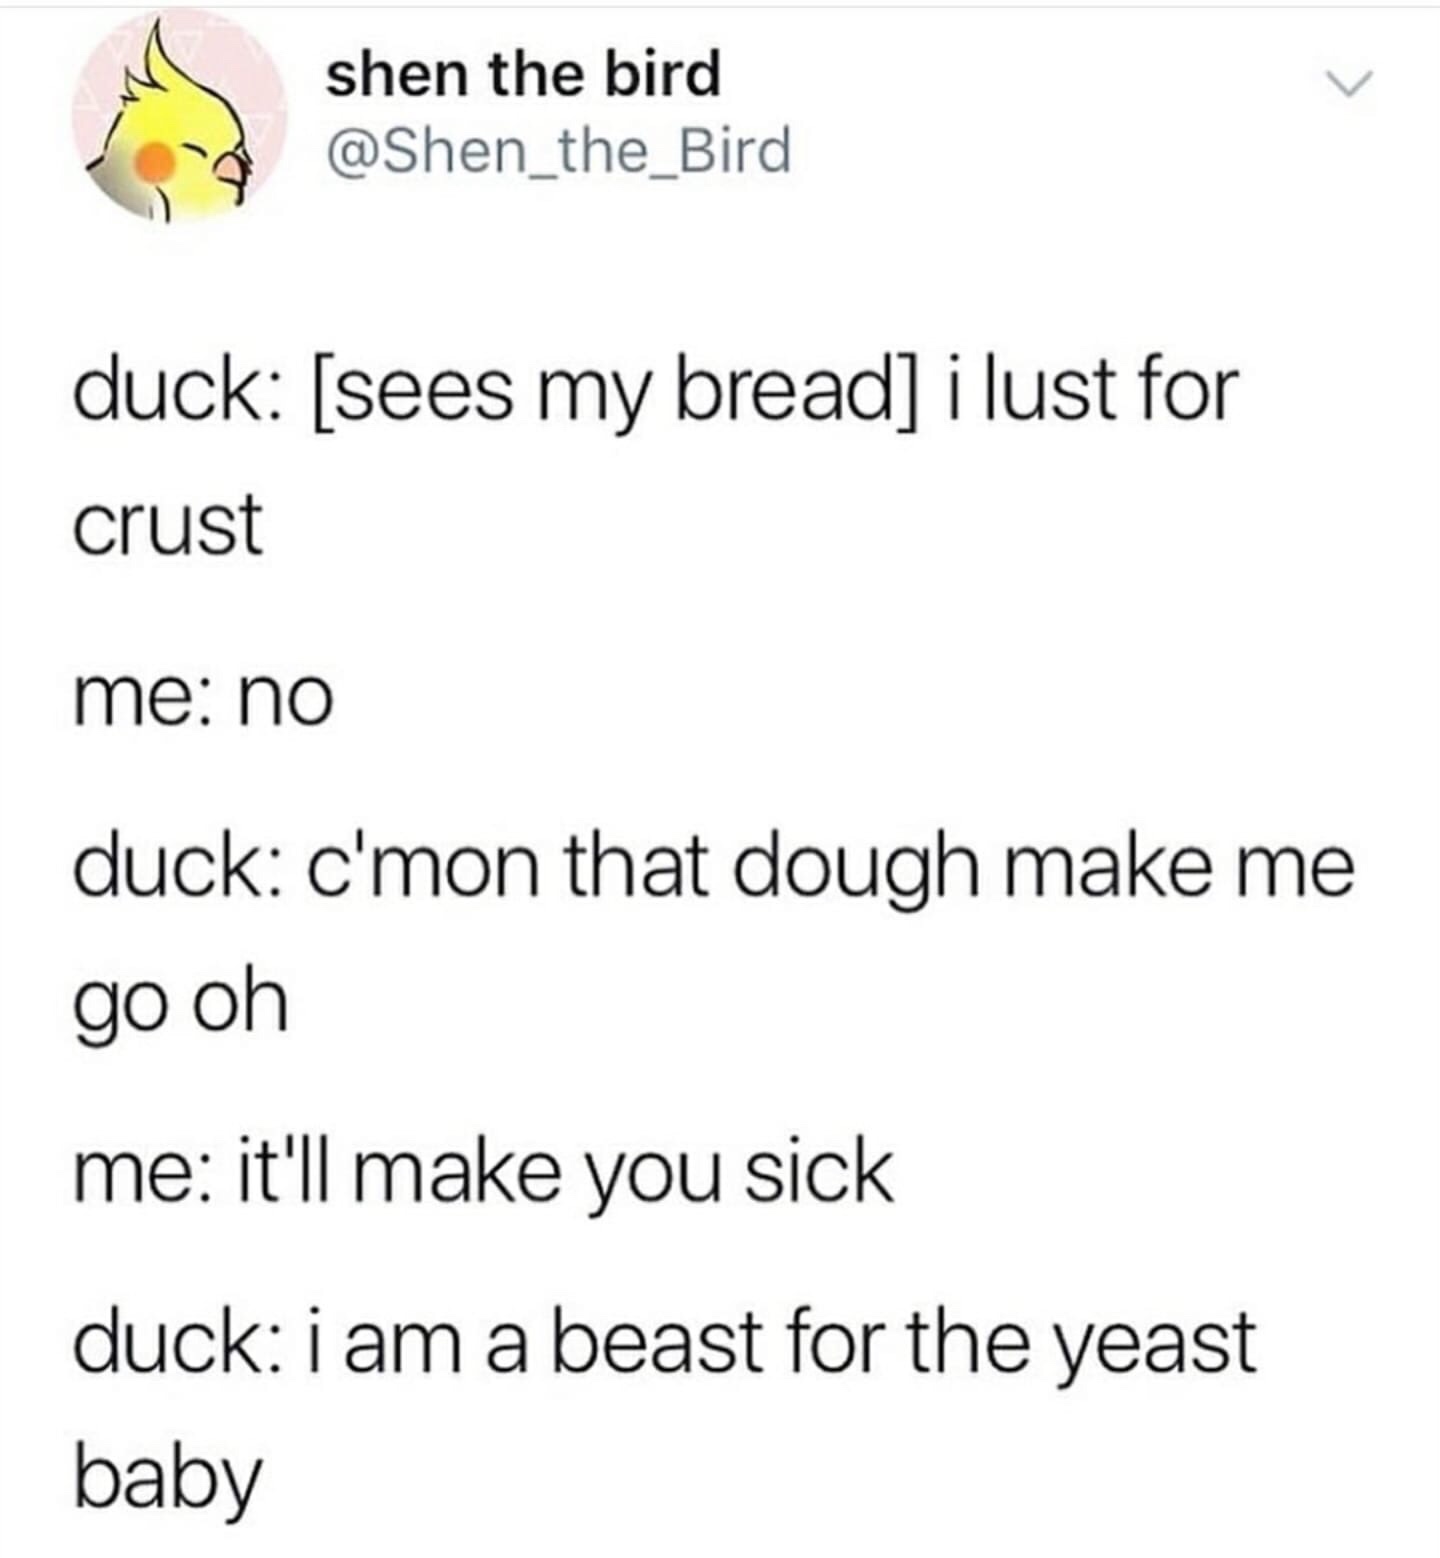 iphone quotes - Shen the birds shen the bird duck sees my bread i lust for crust me no duck c'mon that dough make me go oh me it'll make you sick duck i am a beast for the yeast baby